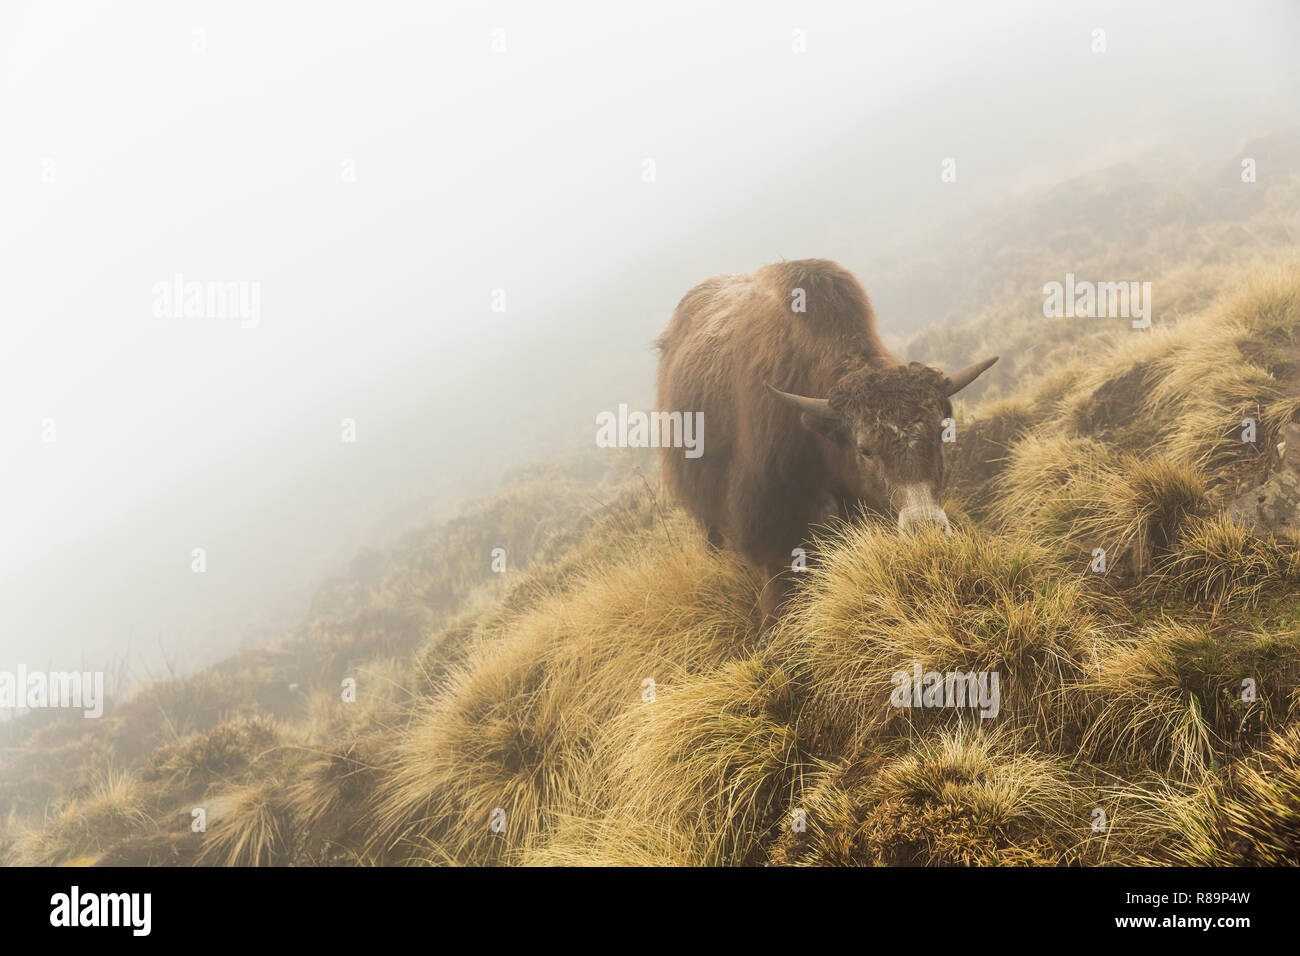 Domesticated brown long-haired yak on the mountainside in Annapurna Himal, Nepal, Himalayas, Asia Stock Photo